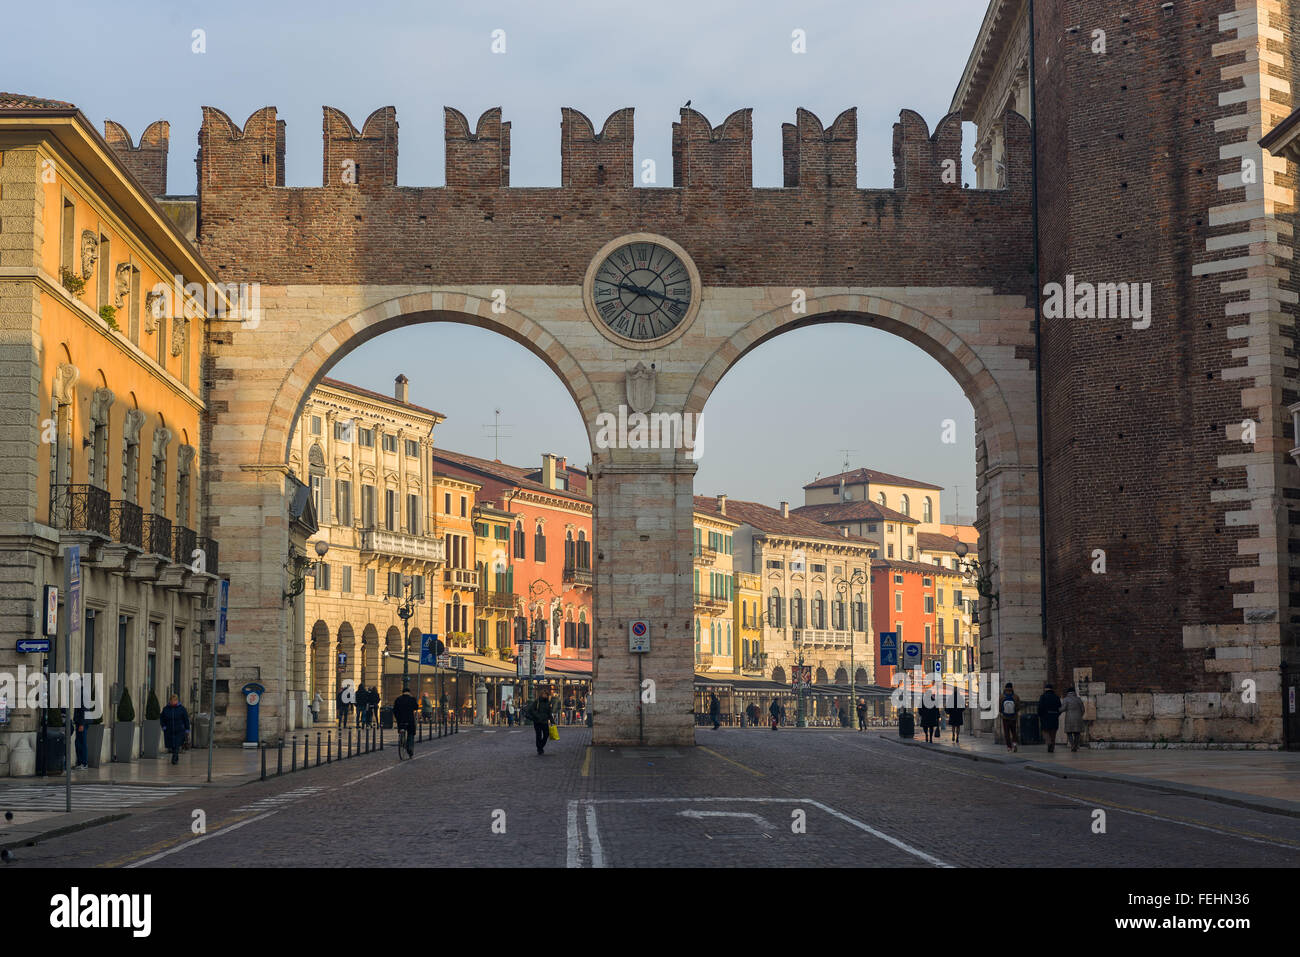 The medieval Porta Nuova, gate to the old town of Verona. Stock Photo